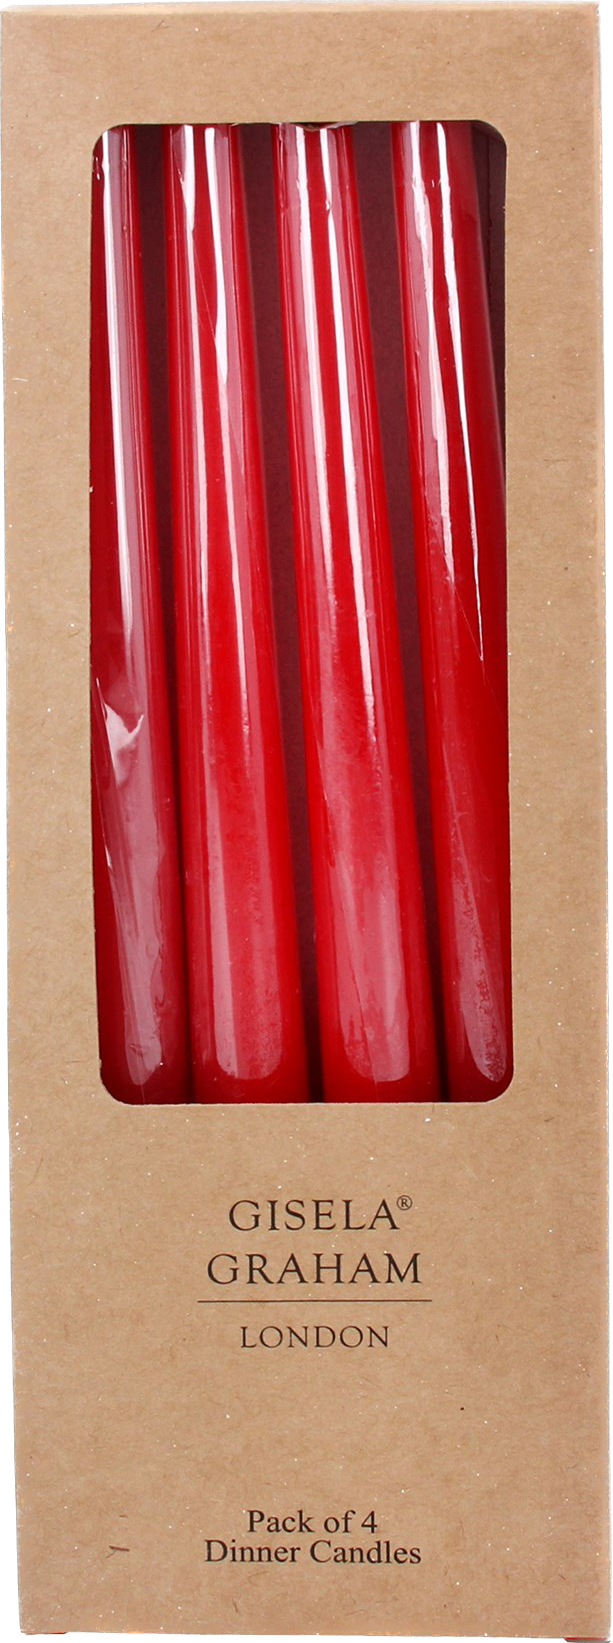 
Pack of four red dinner candles 

Dimensions: 25x9x2

Compostition: 90% paraffin and 10% paper

Weight: 213g